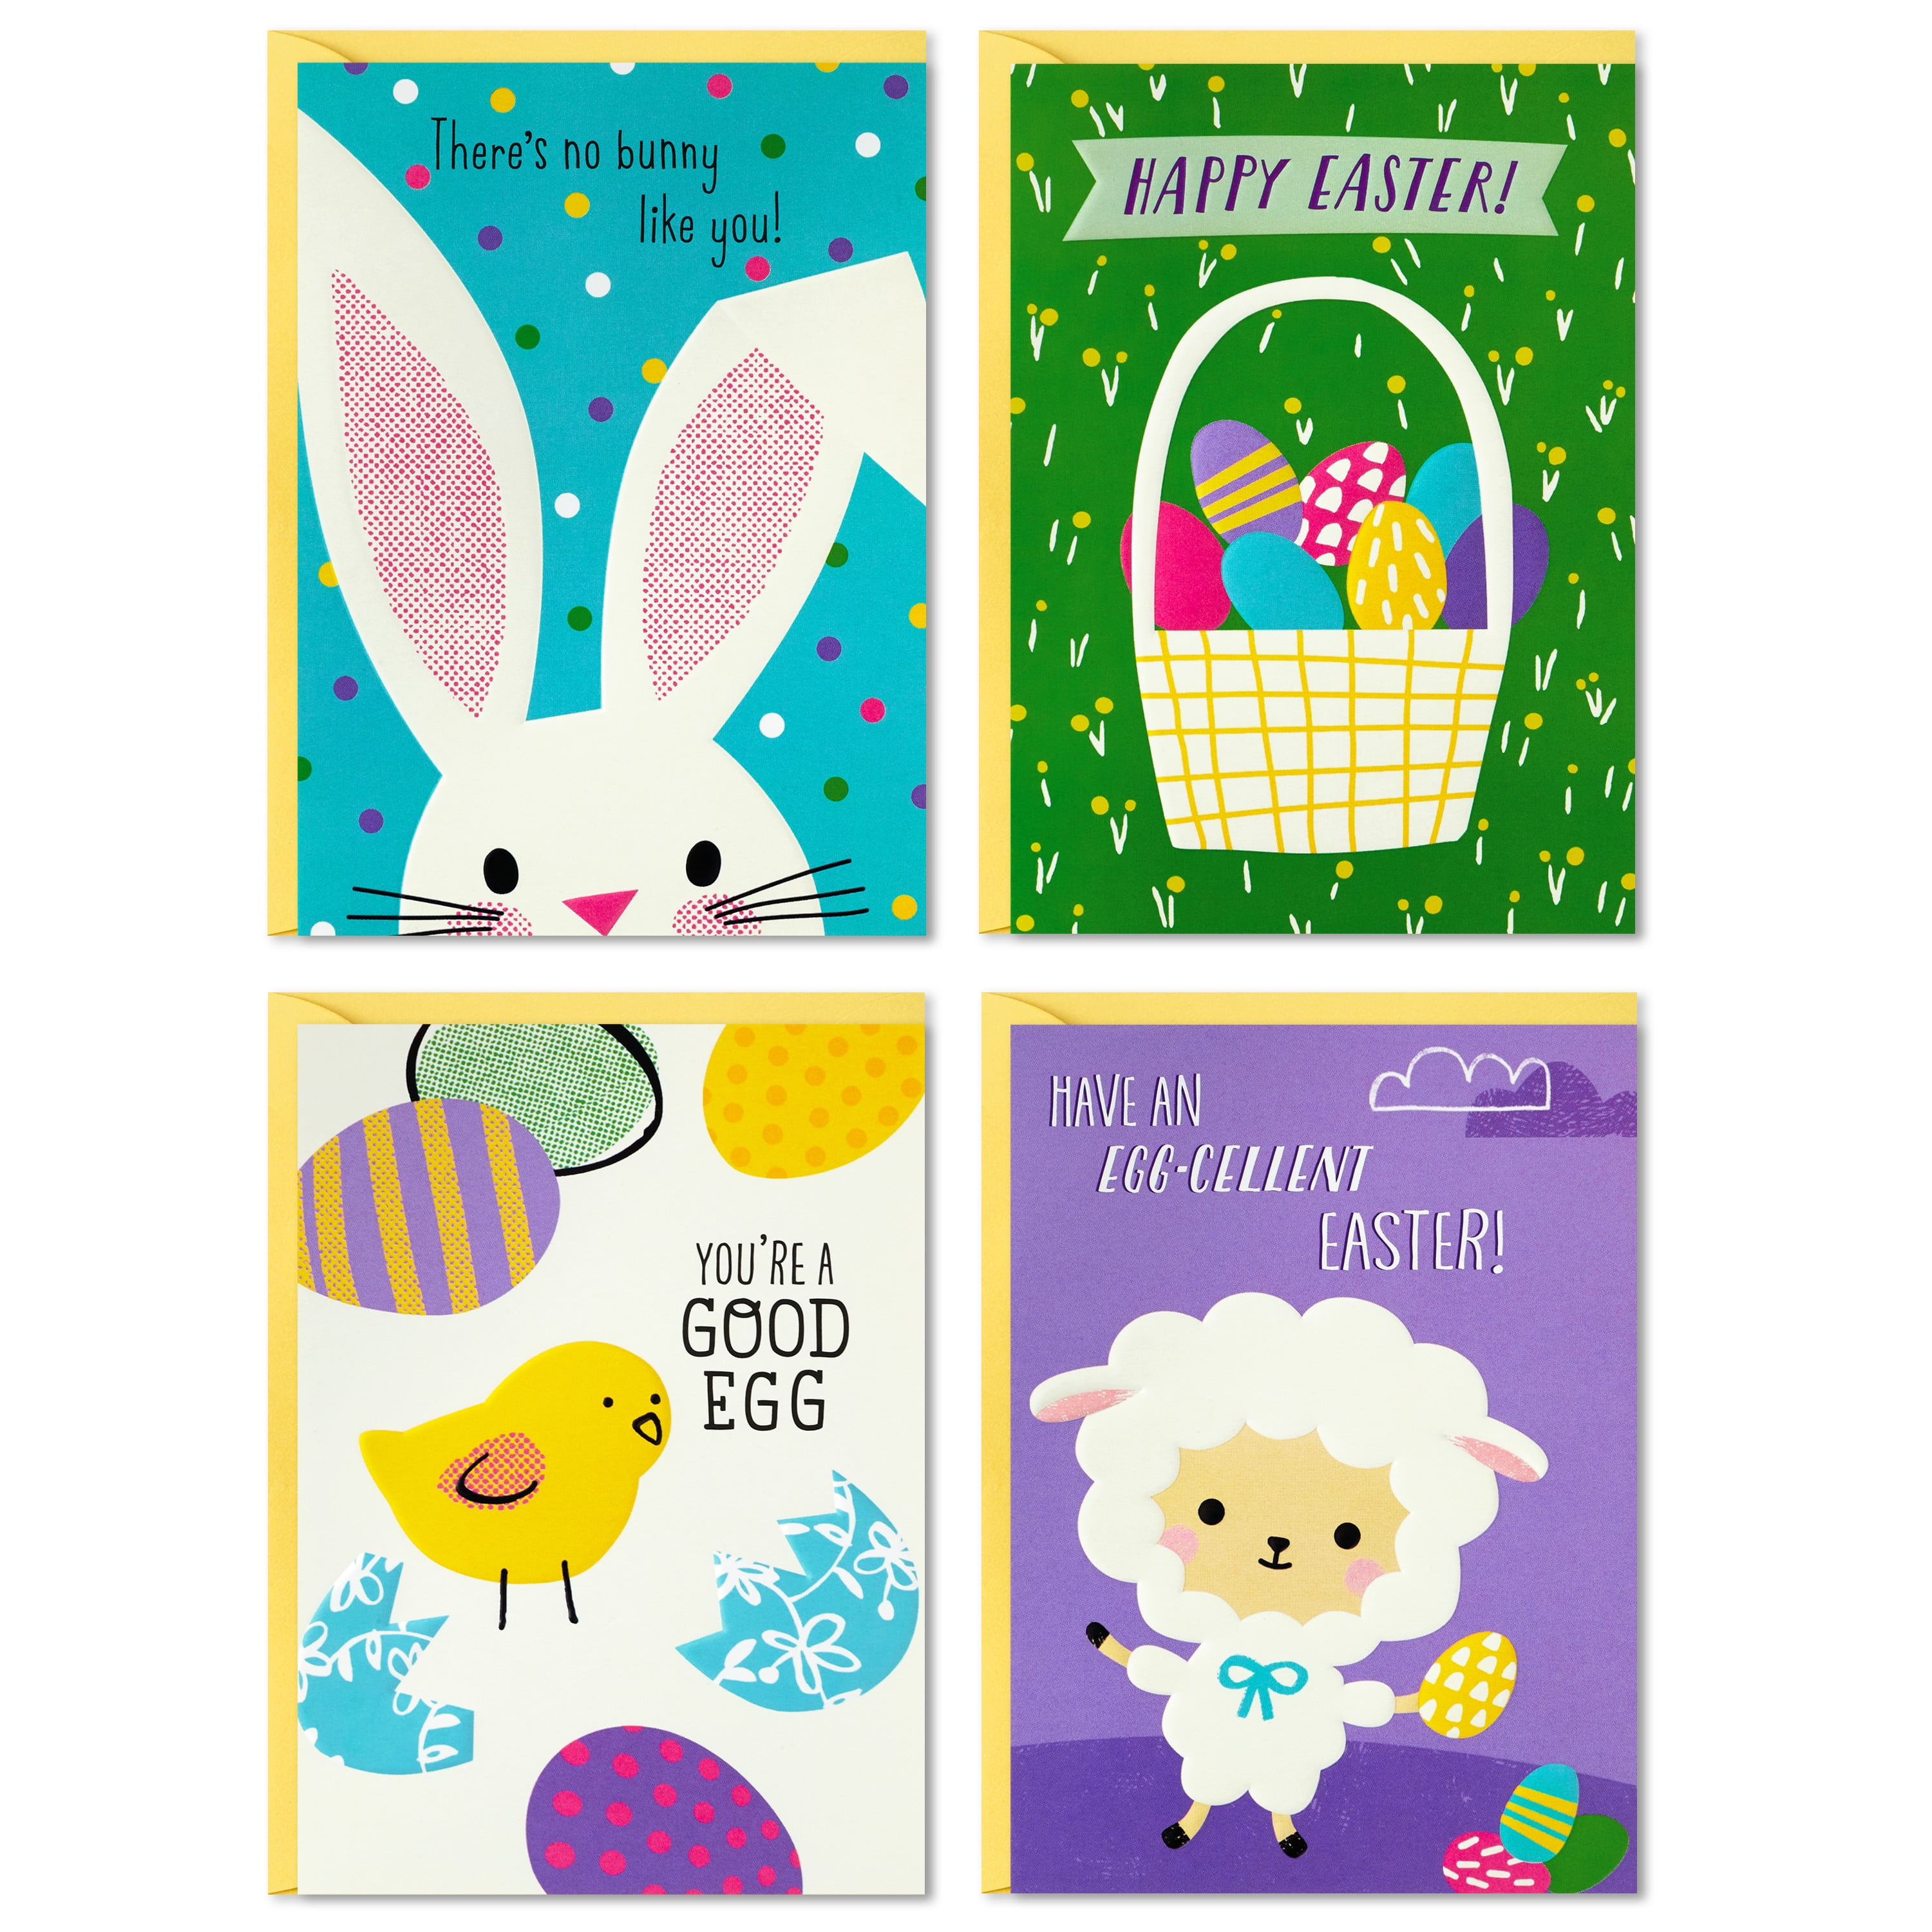 With Love Daughter At Easter Greetings Card With Gold Foil Cute Bunny Eggs